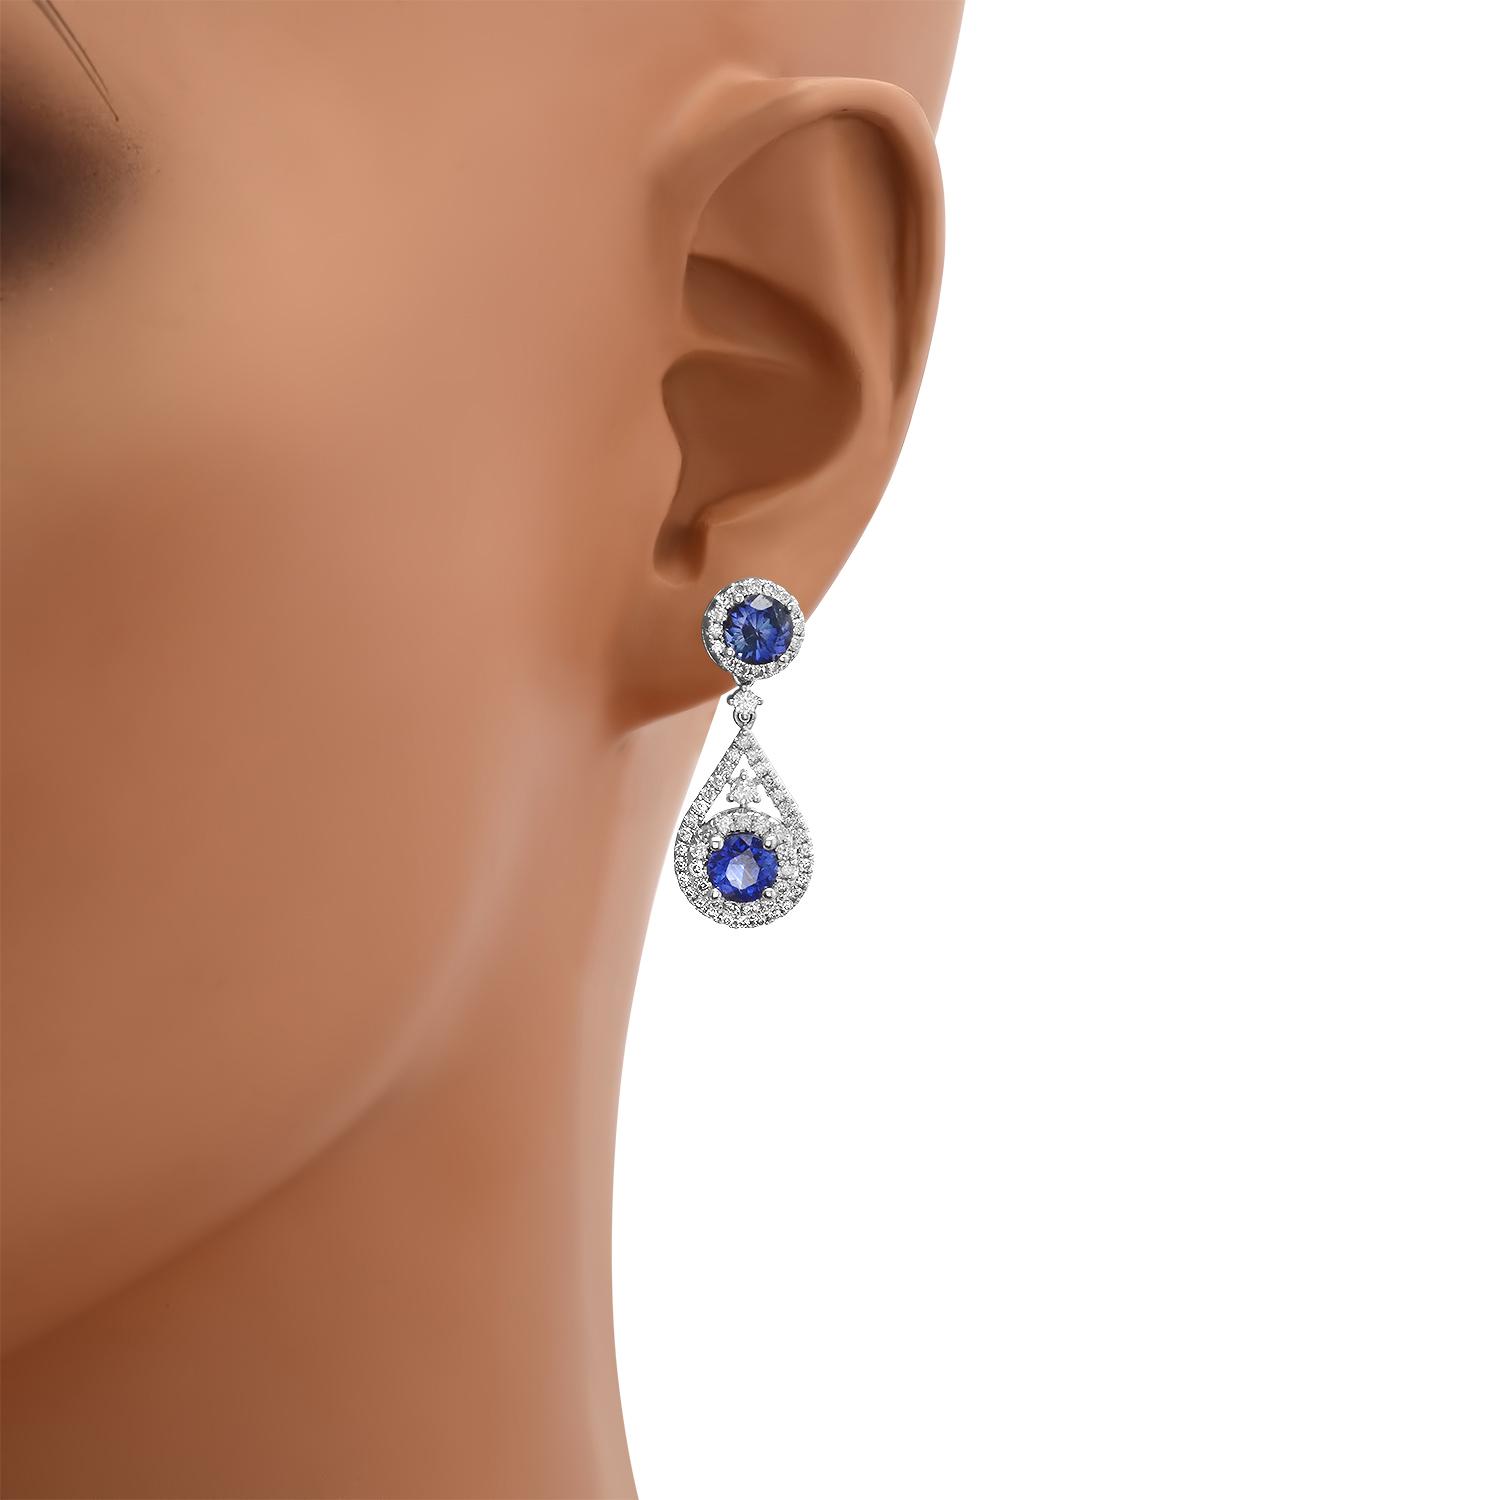 18K White Gold Setting with 2.21ct Sapphire and 0.82ct Diamond Earrings